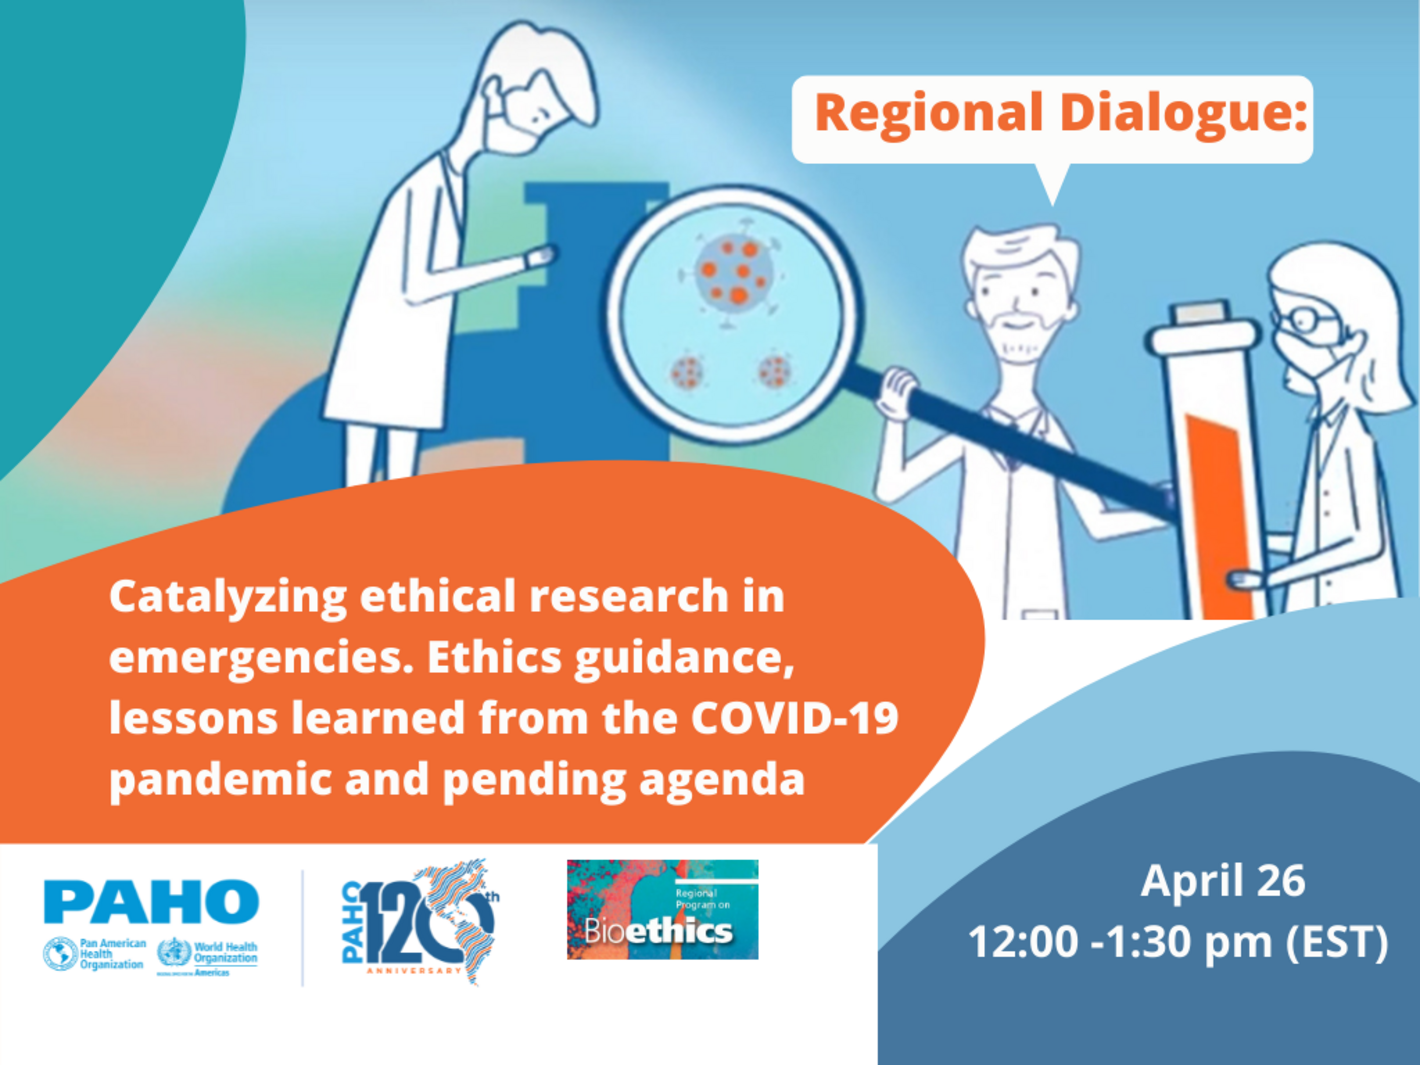 Catalyzing ethical research in emergencies